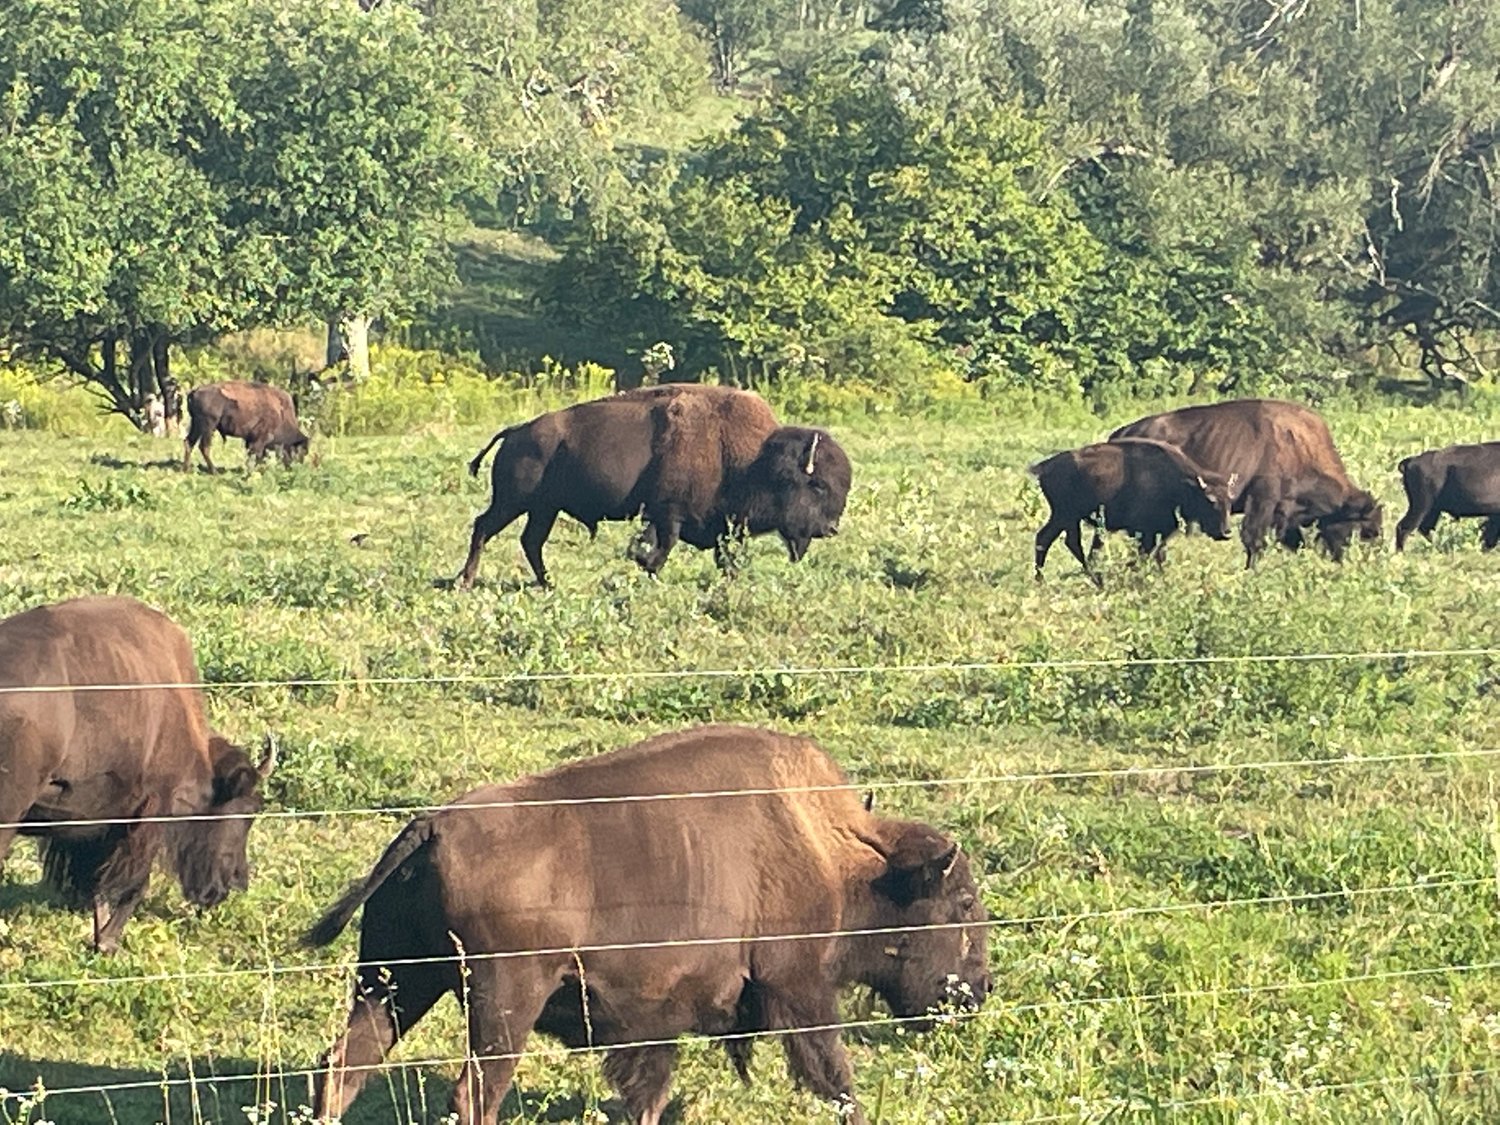 Buffalo are seen grazing on East Brook Road in Walton Aug. 25. “Always amazing to see,” said Joan Stone, who captured the photo.